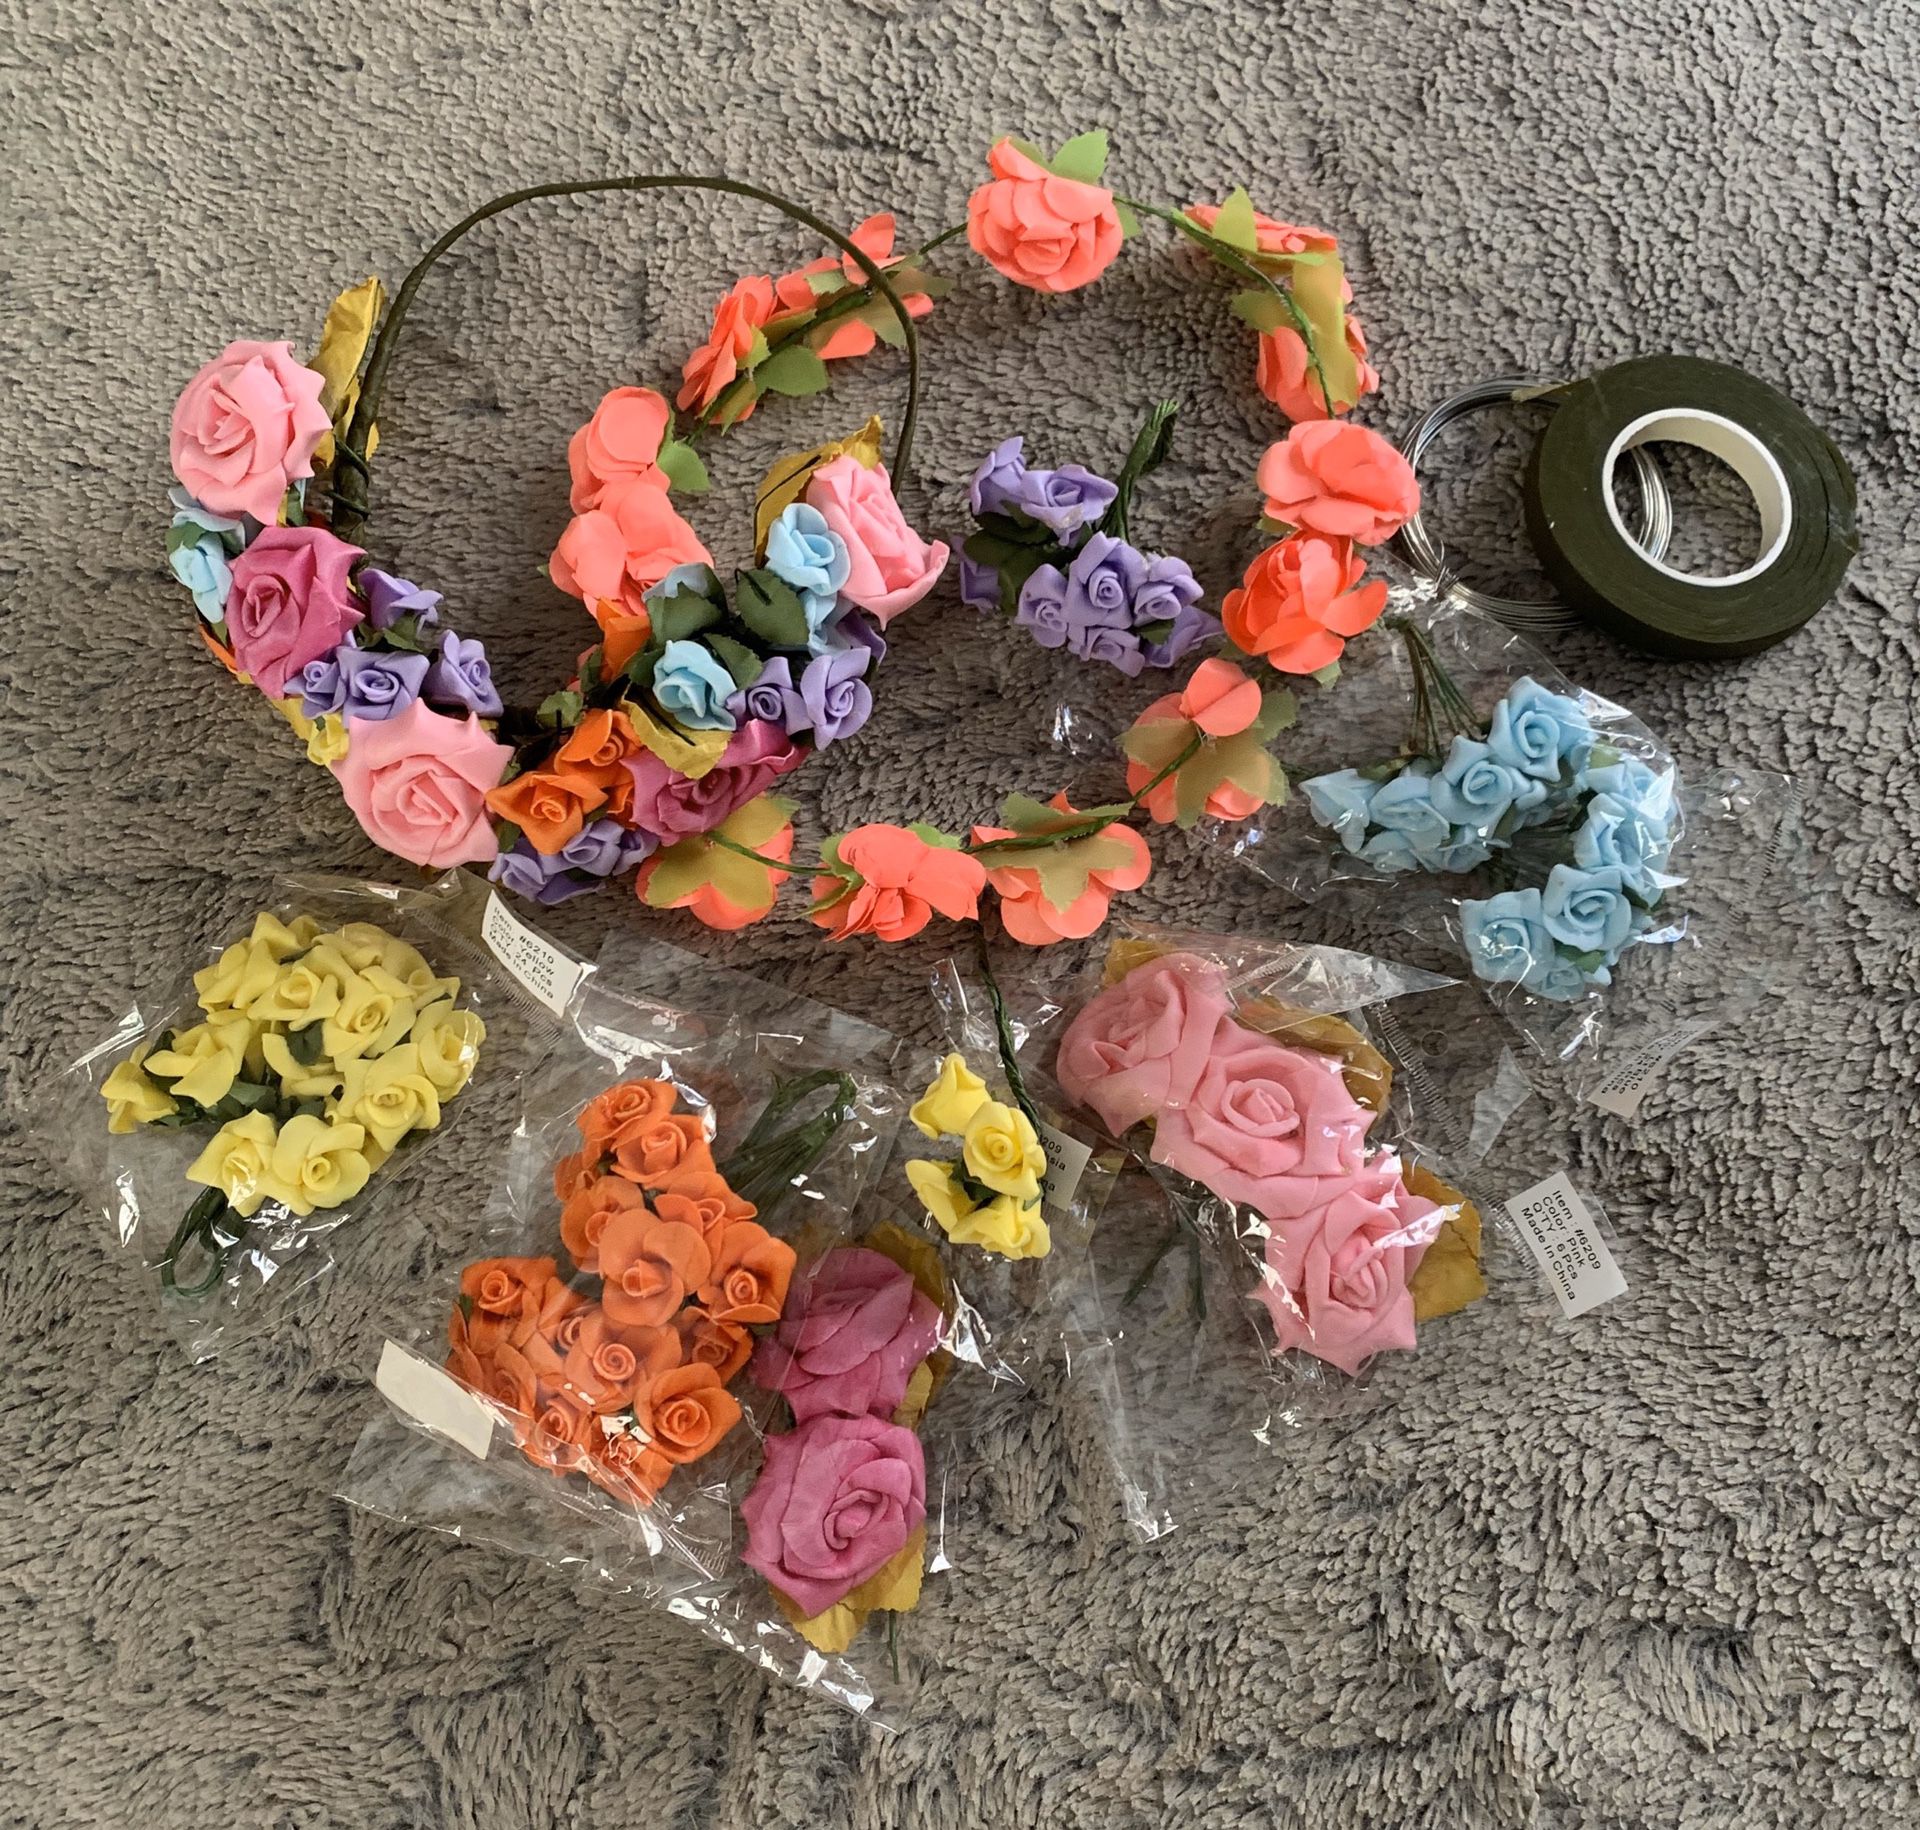 Mixed Flowers for Flower Crowns